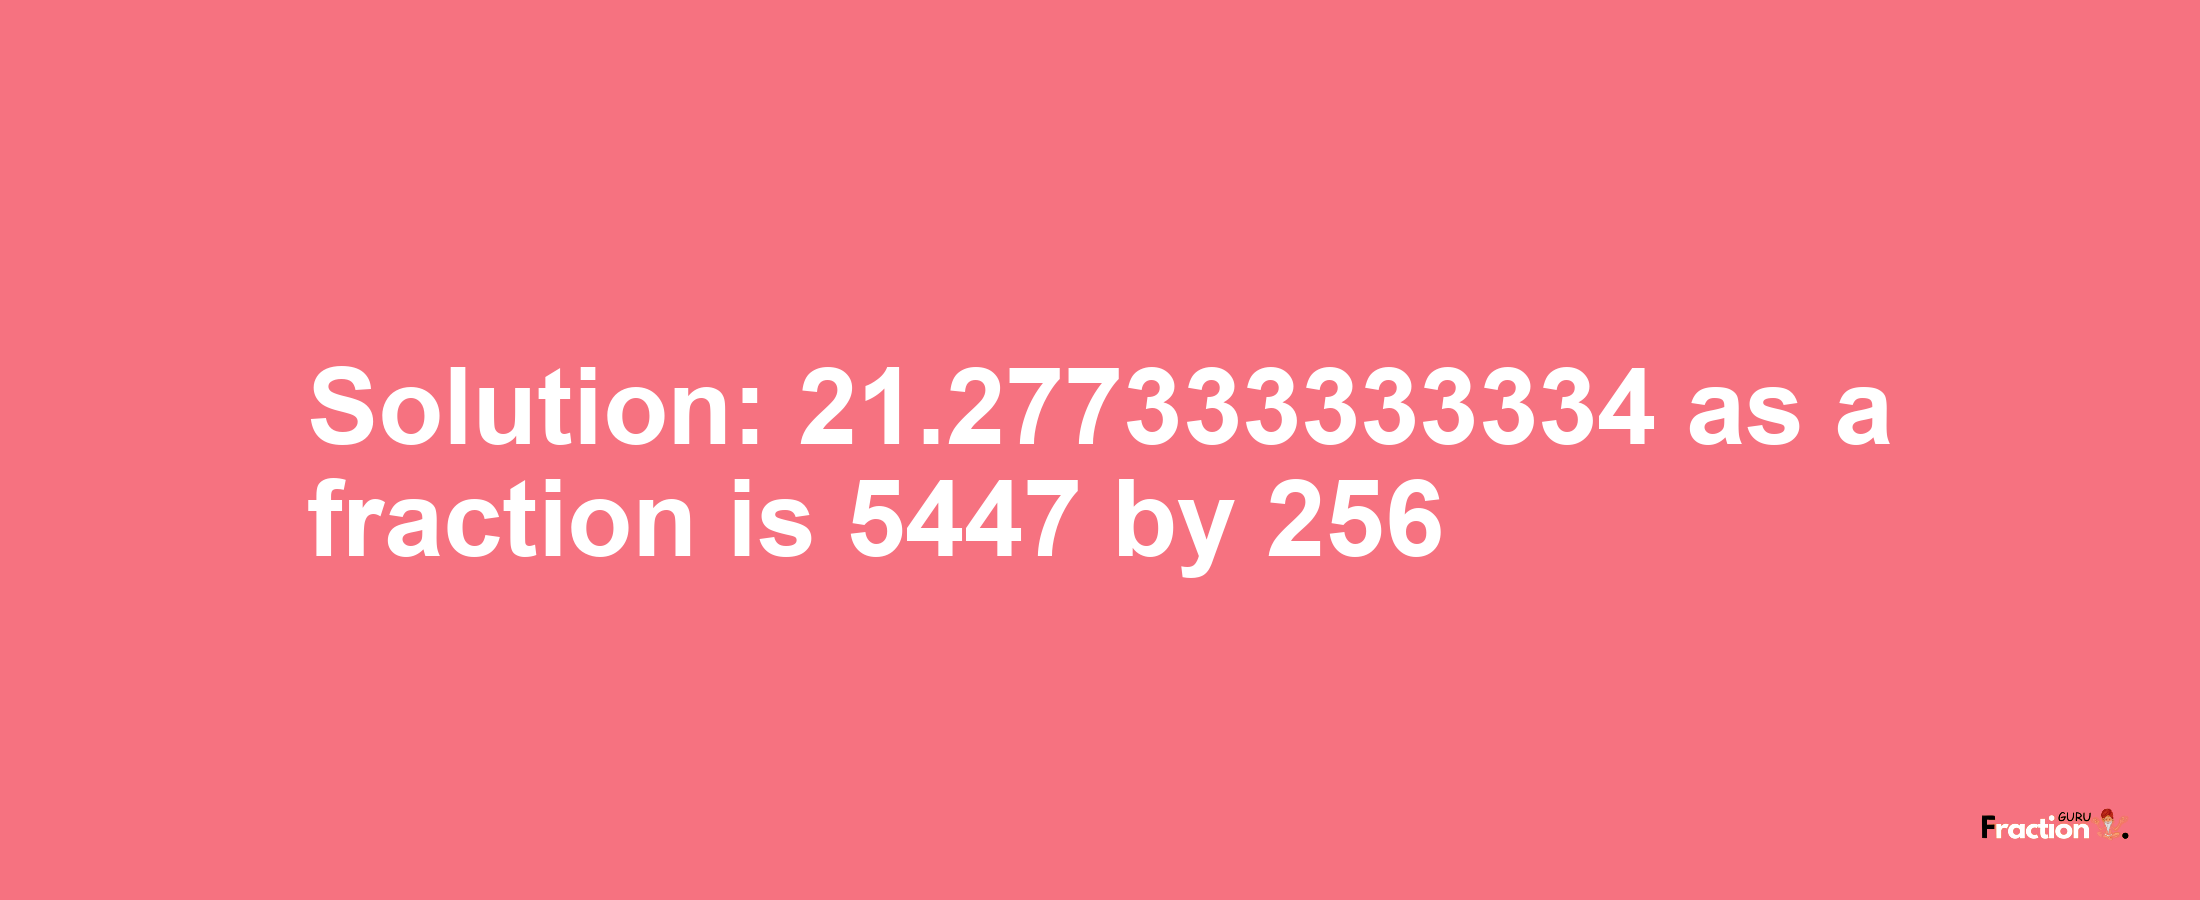 Solution:21.277333333334 as a fraction is 5447/256